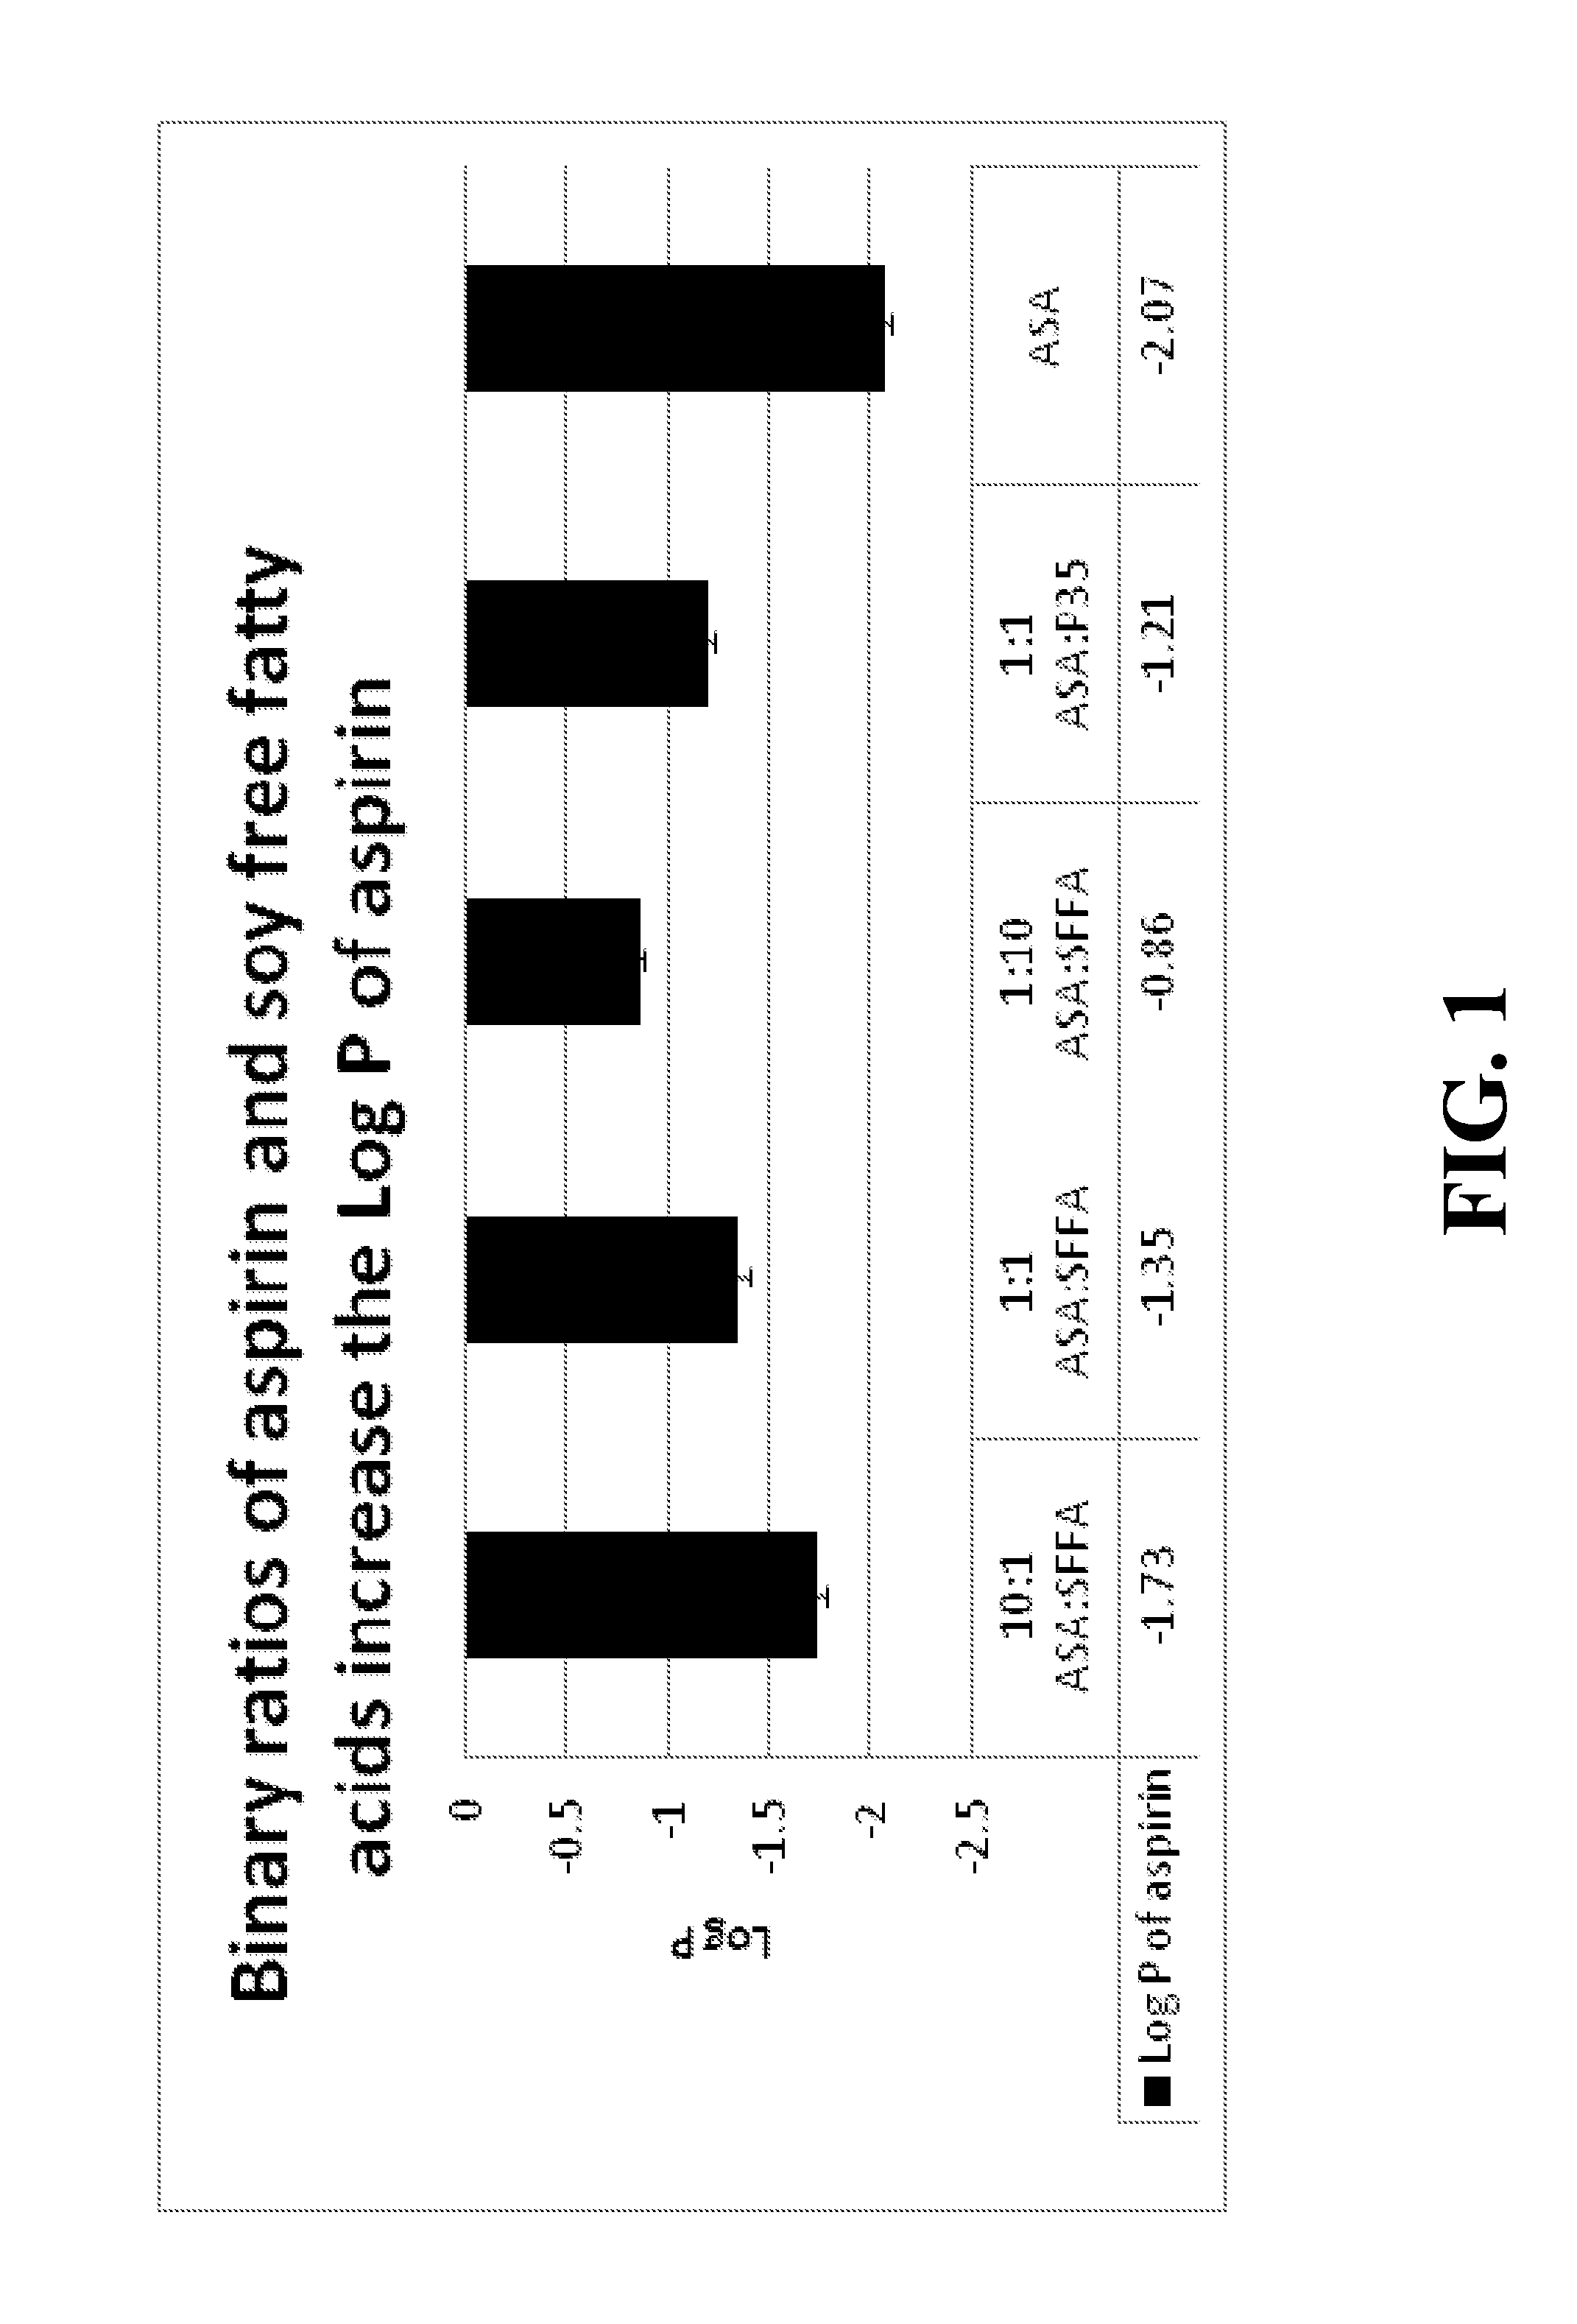 pH DEPENDENT CARRIERS FOR TARGETED RELEASE OF PHARMACEUTICALS ALONG THE GASTROINTESTINAL TRACT, COMPOSITIONS THEREFROM, AND MAKING AND USING SAME